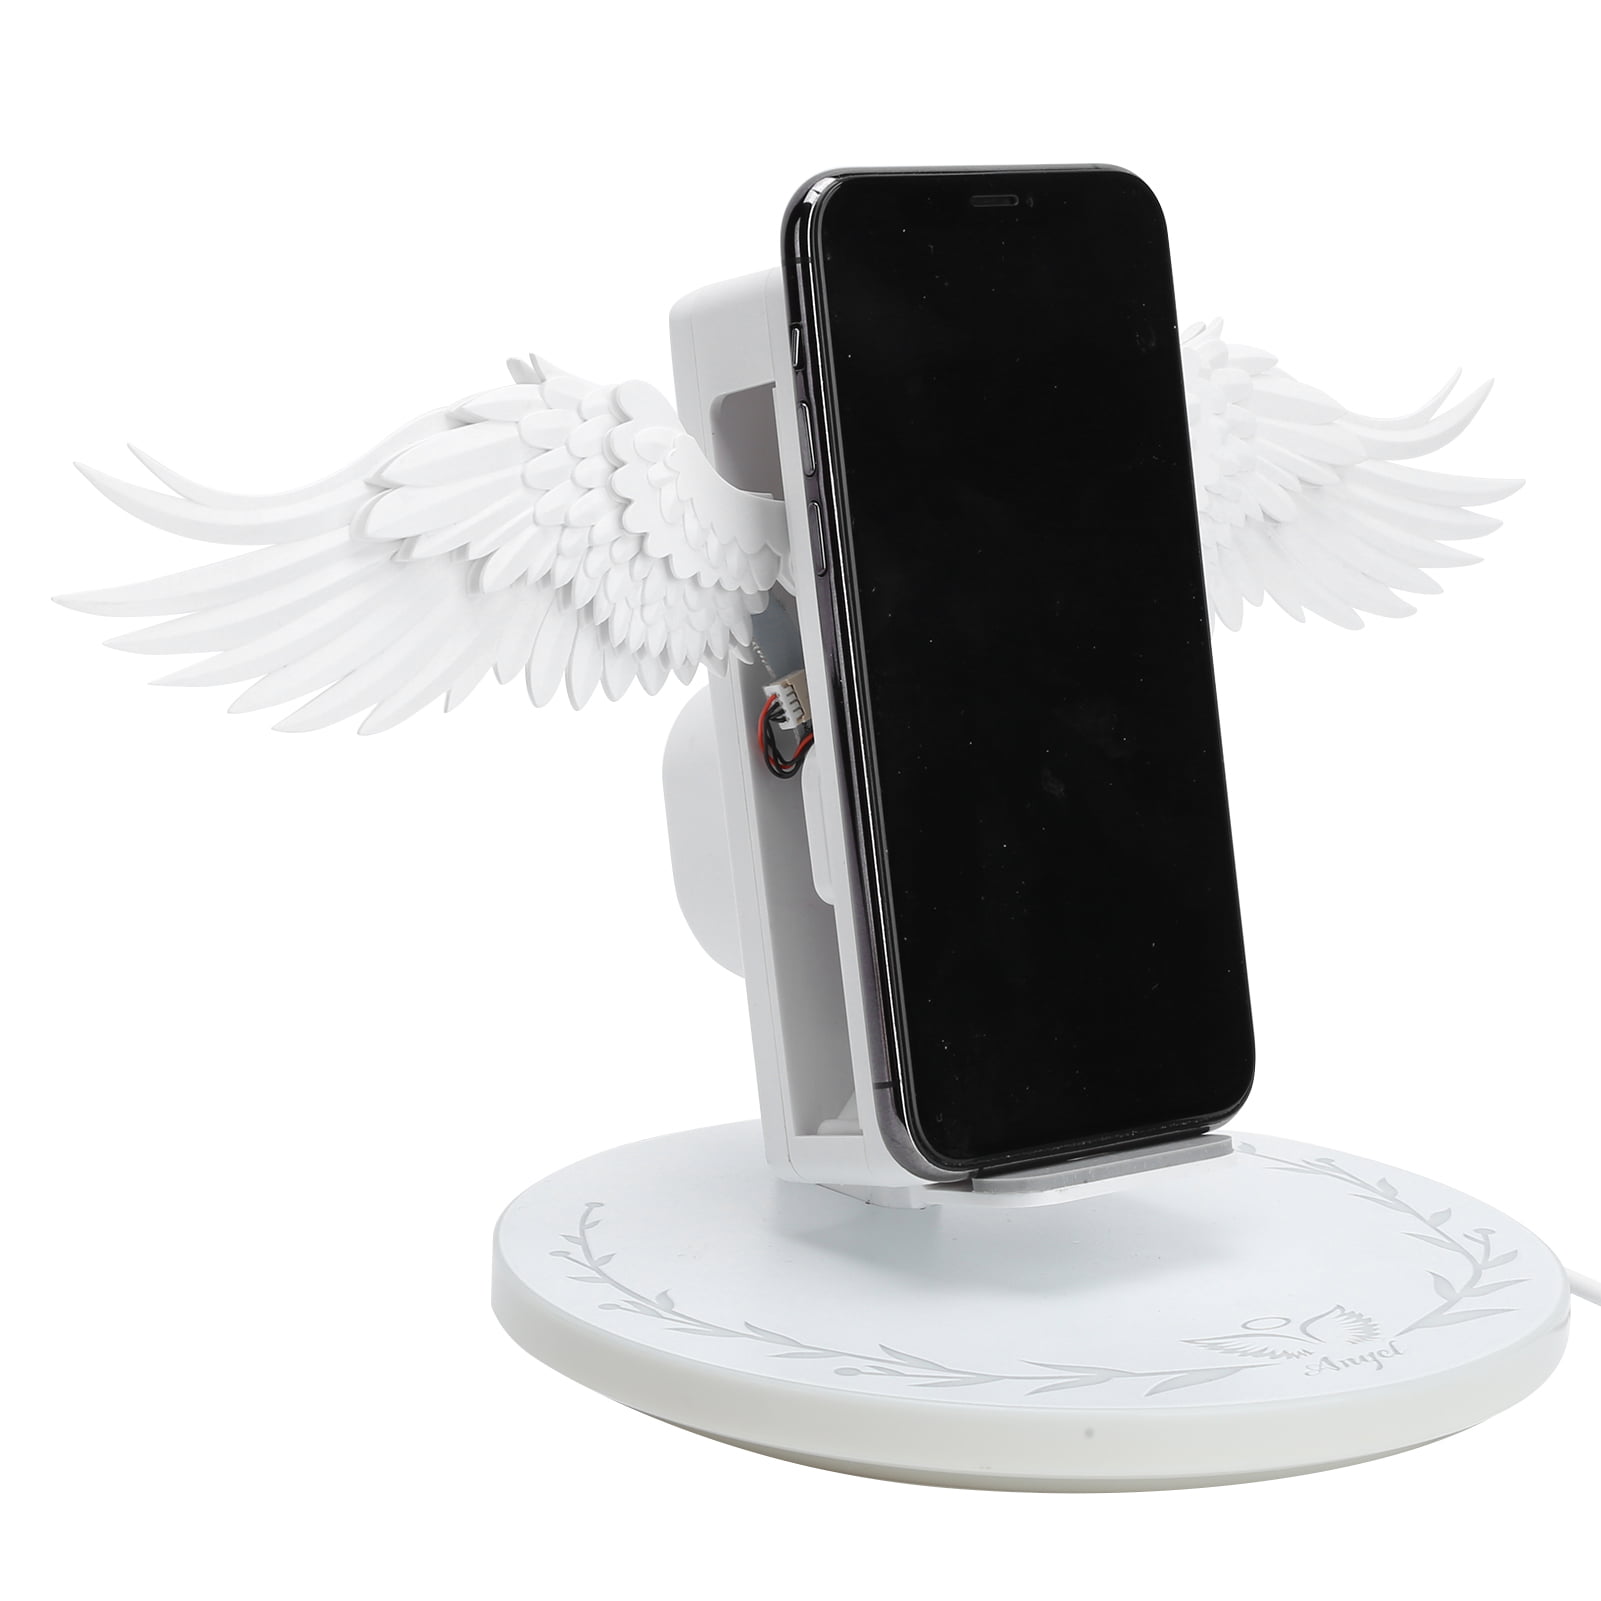 YLSHRF 10W Wireless Charger Angel Wing Style Fast Charging for Mobile Phone  Universal for Office Home,Office Charging Device,Wireless Charger -  Walmart.com